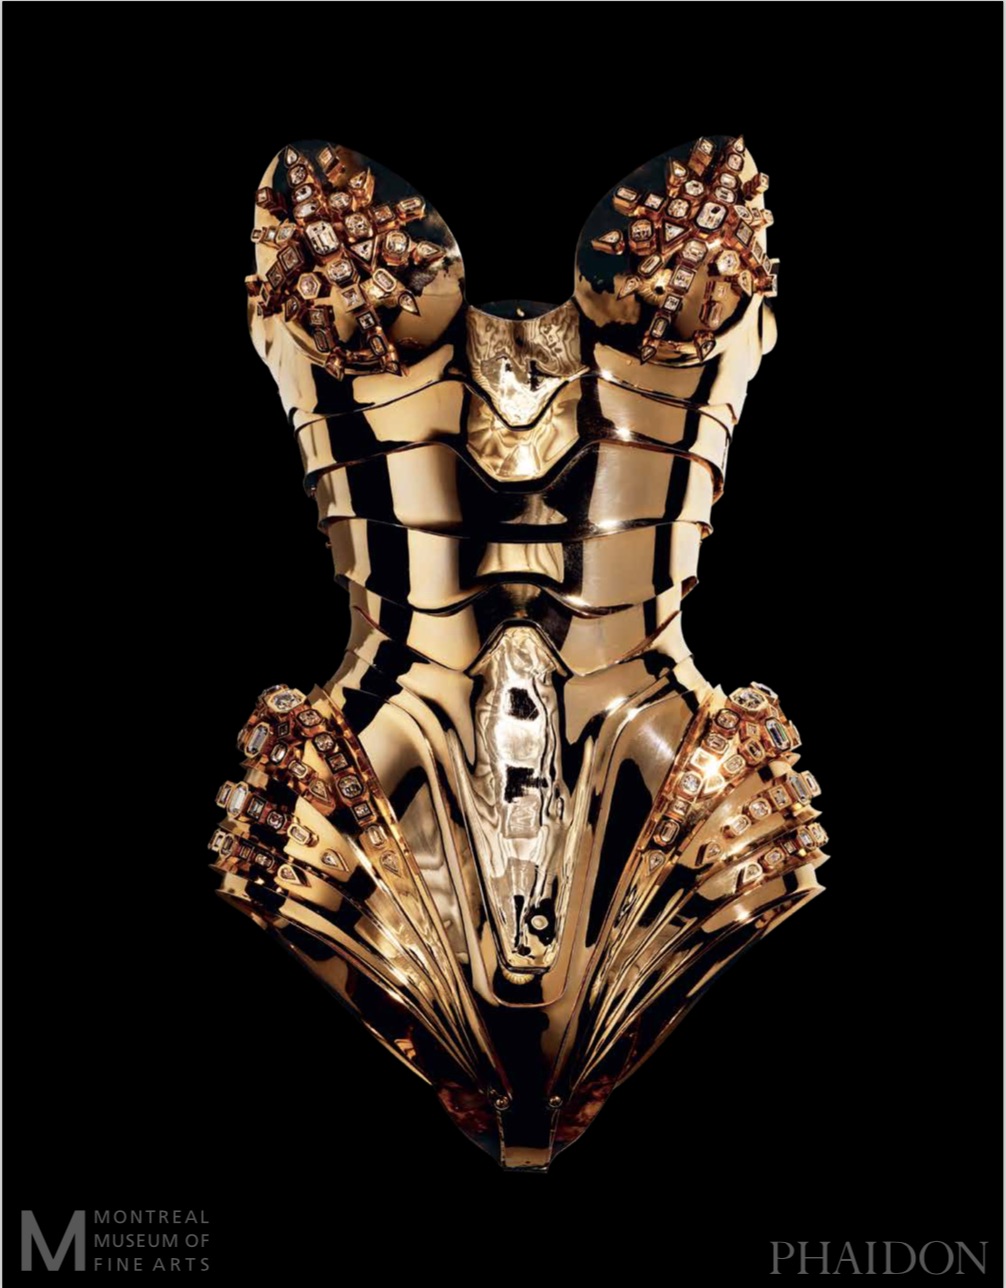 By Thierry-Maxime Loriot from Thierry Mugler: Couturissime copyright Phaidon 2019